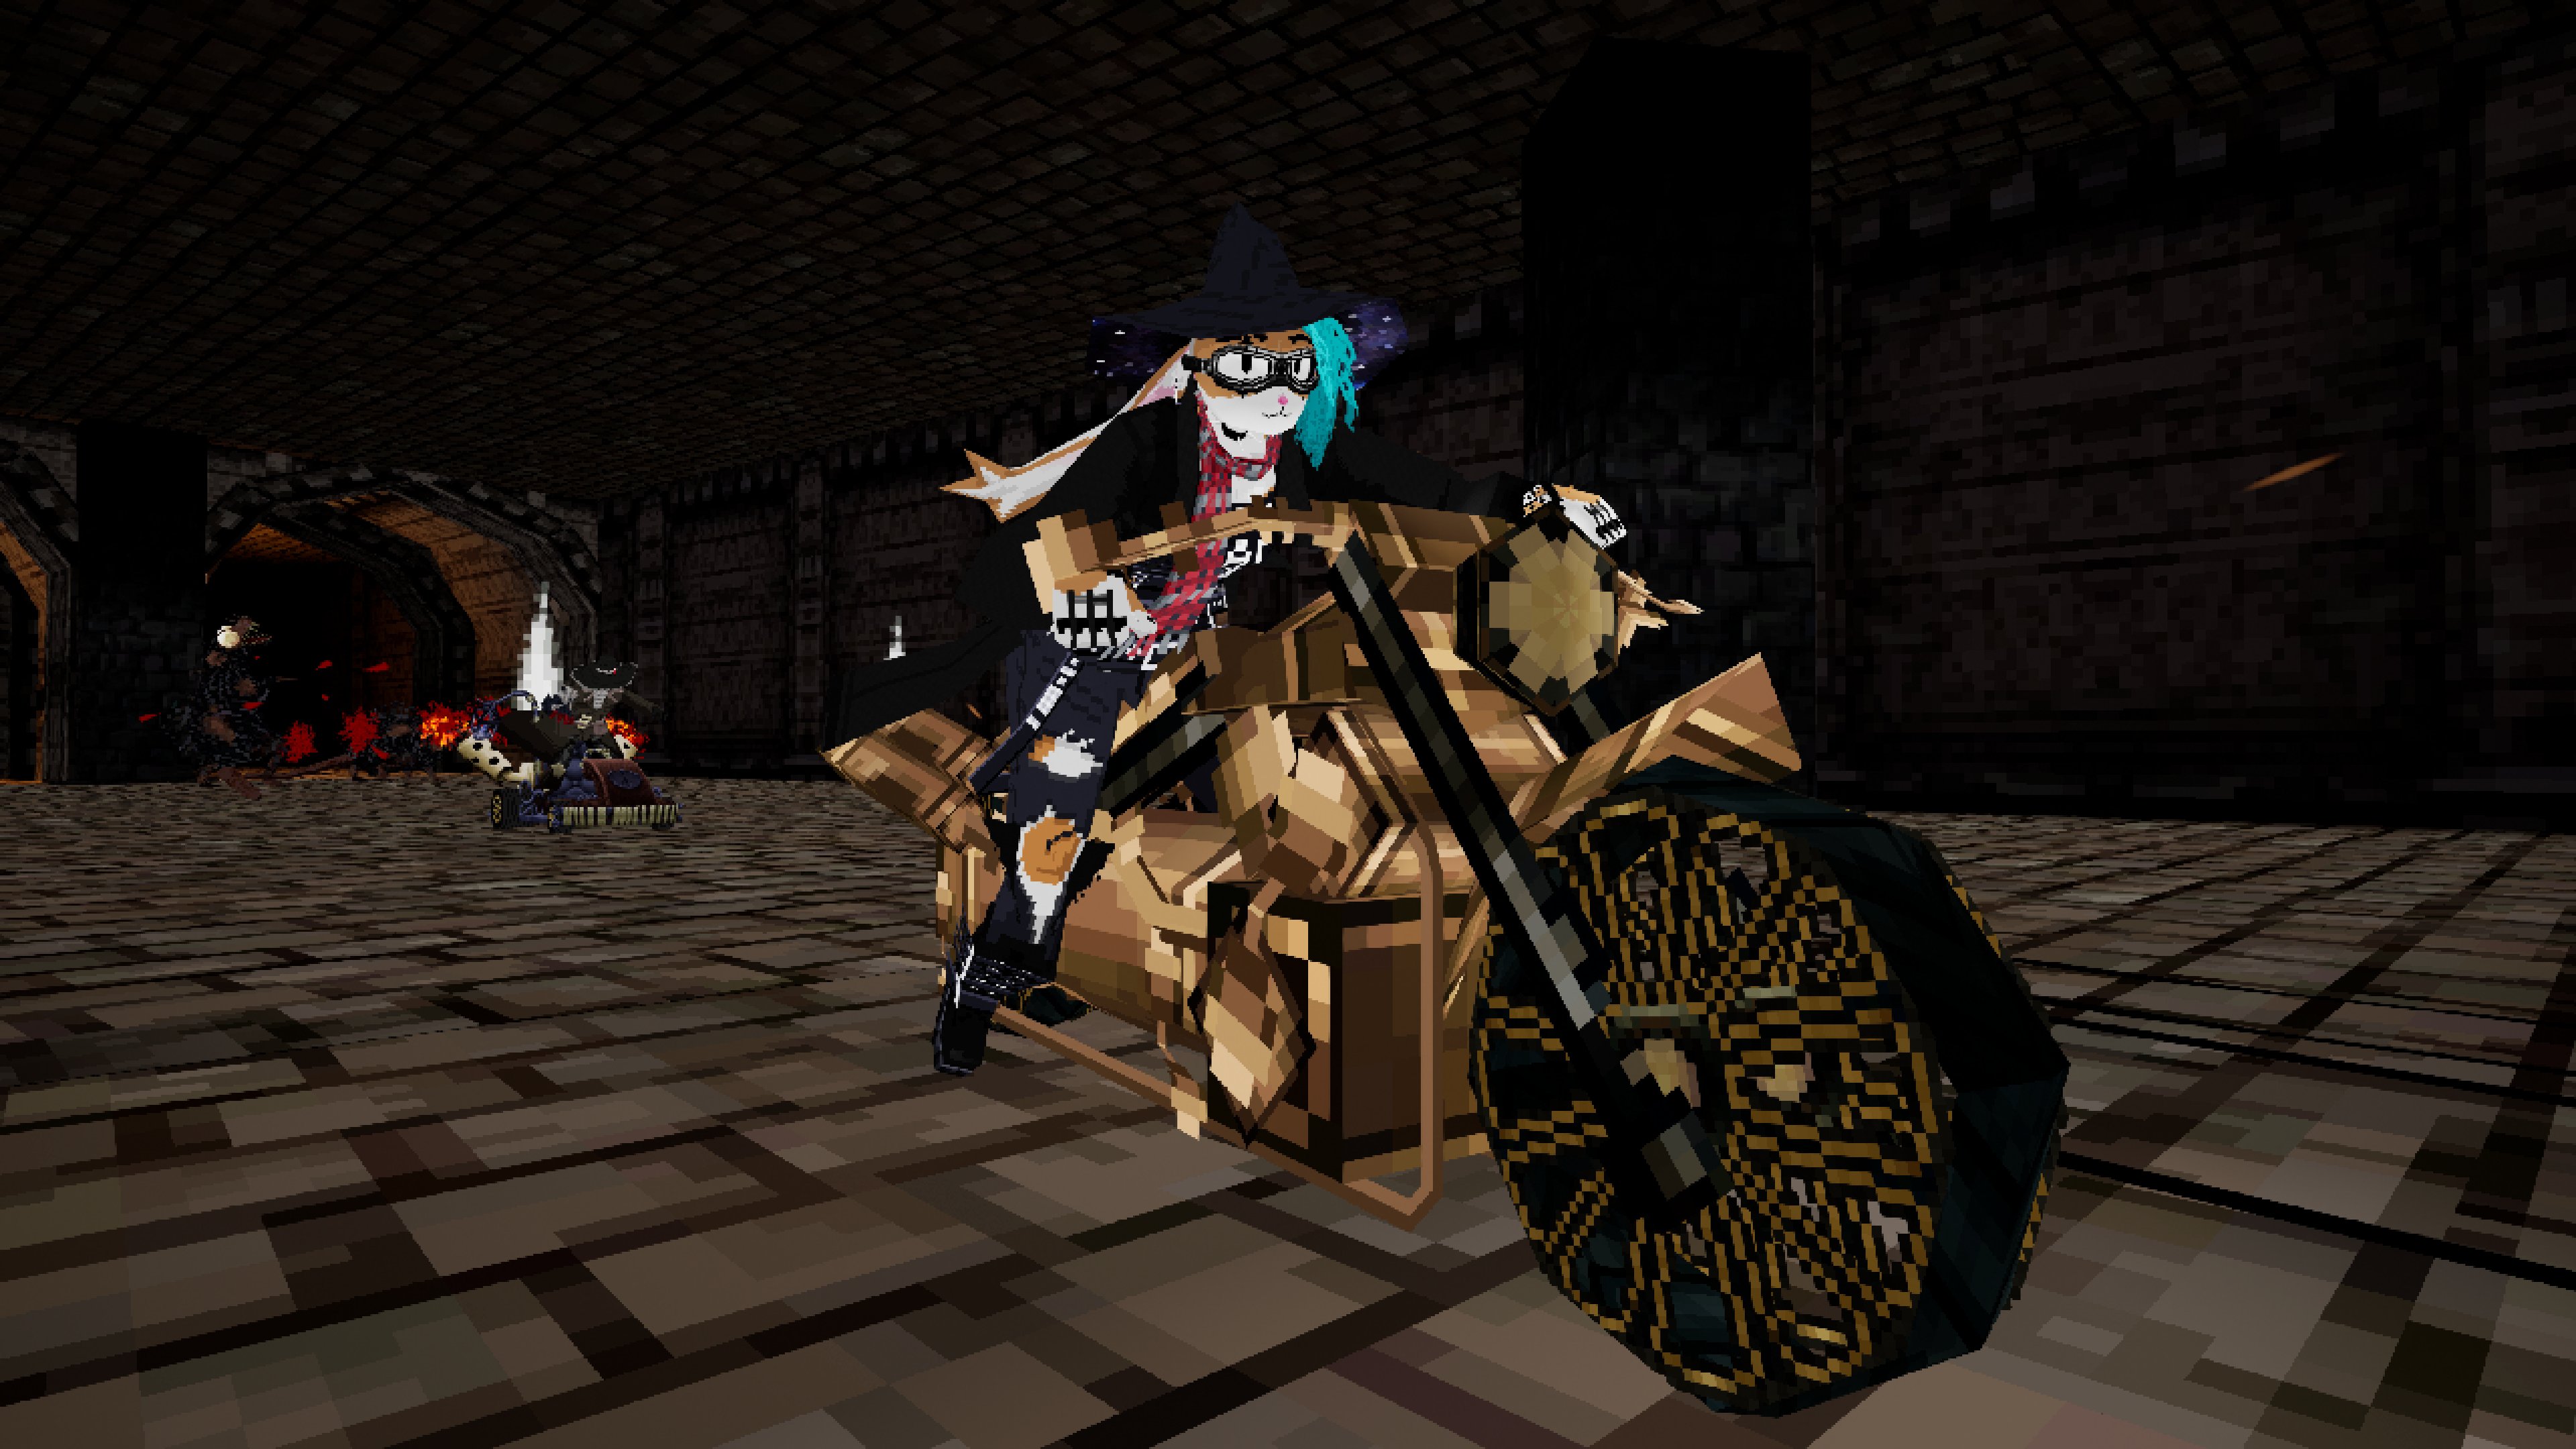 An image of Bunlith, a fursona that's a bunny with a witch hat, tearing asphalt in Nightmare Kart.